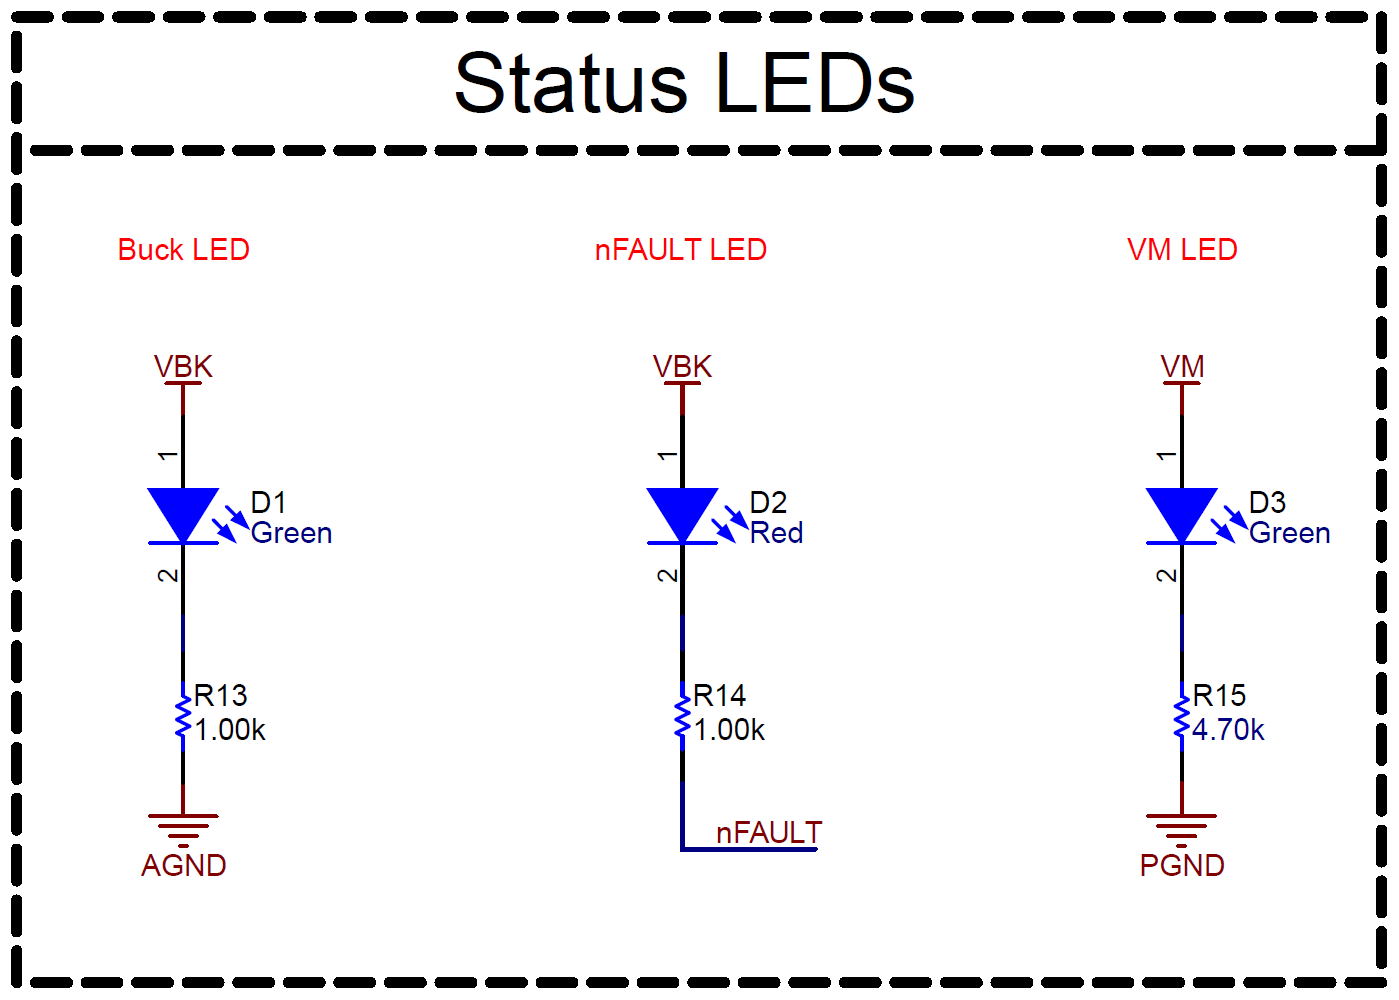 MCF8315PWPEVM Status LEDs Schematic